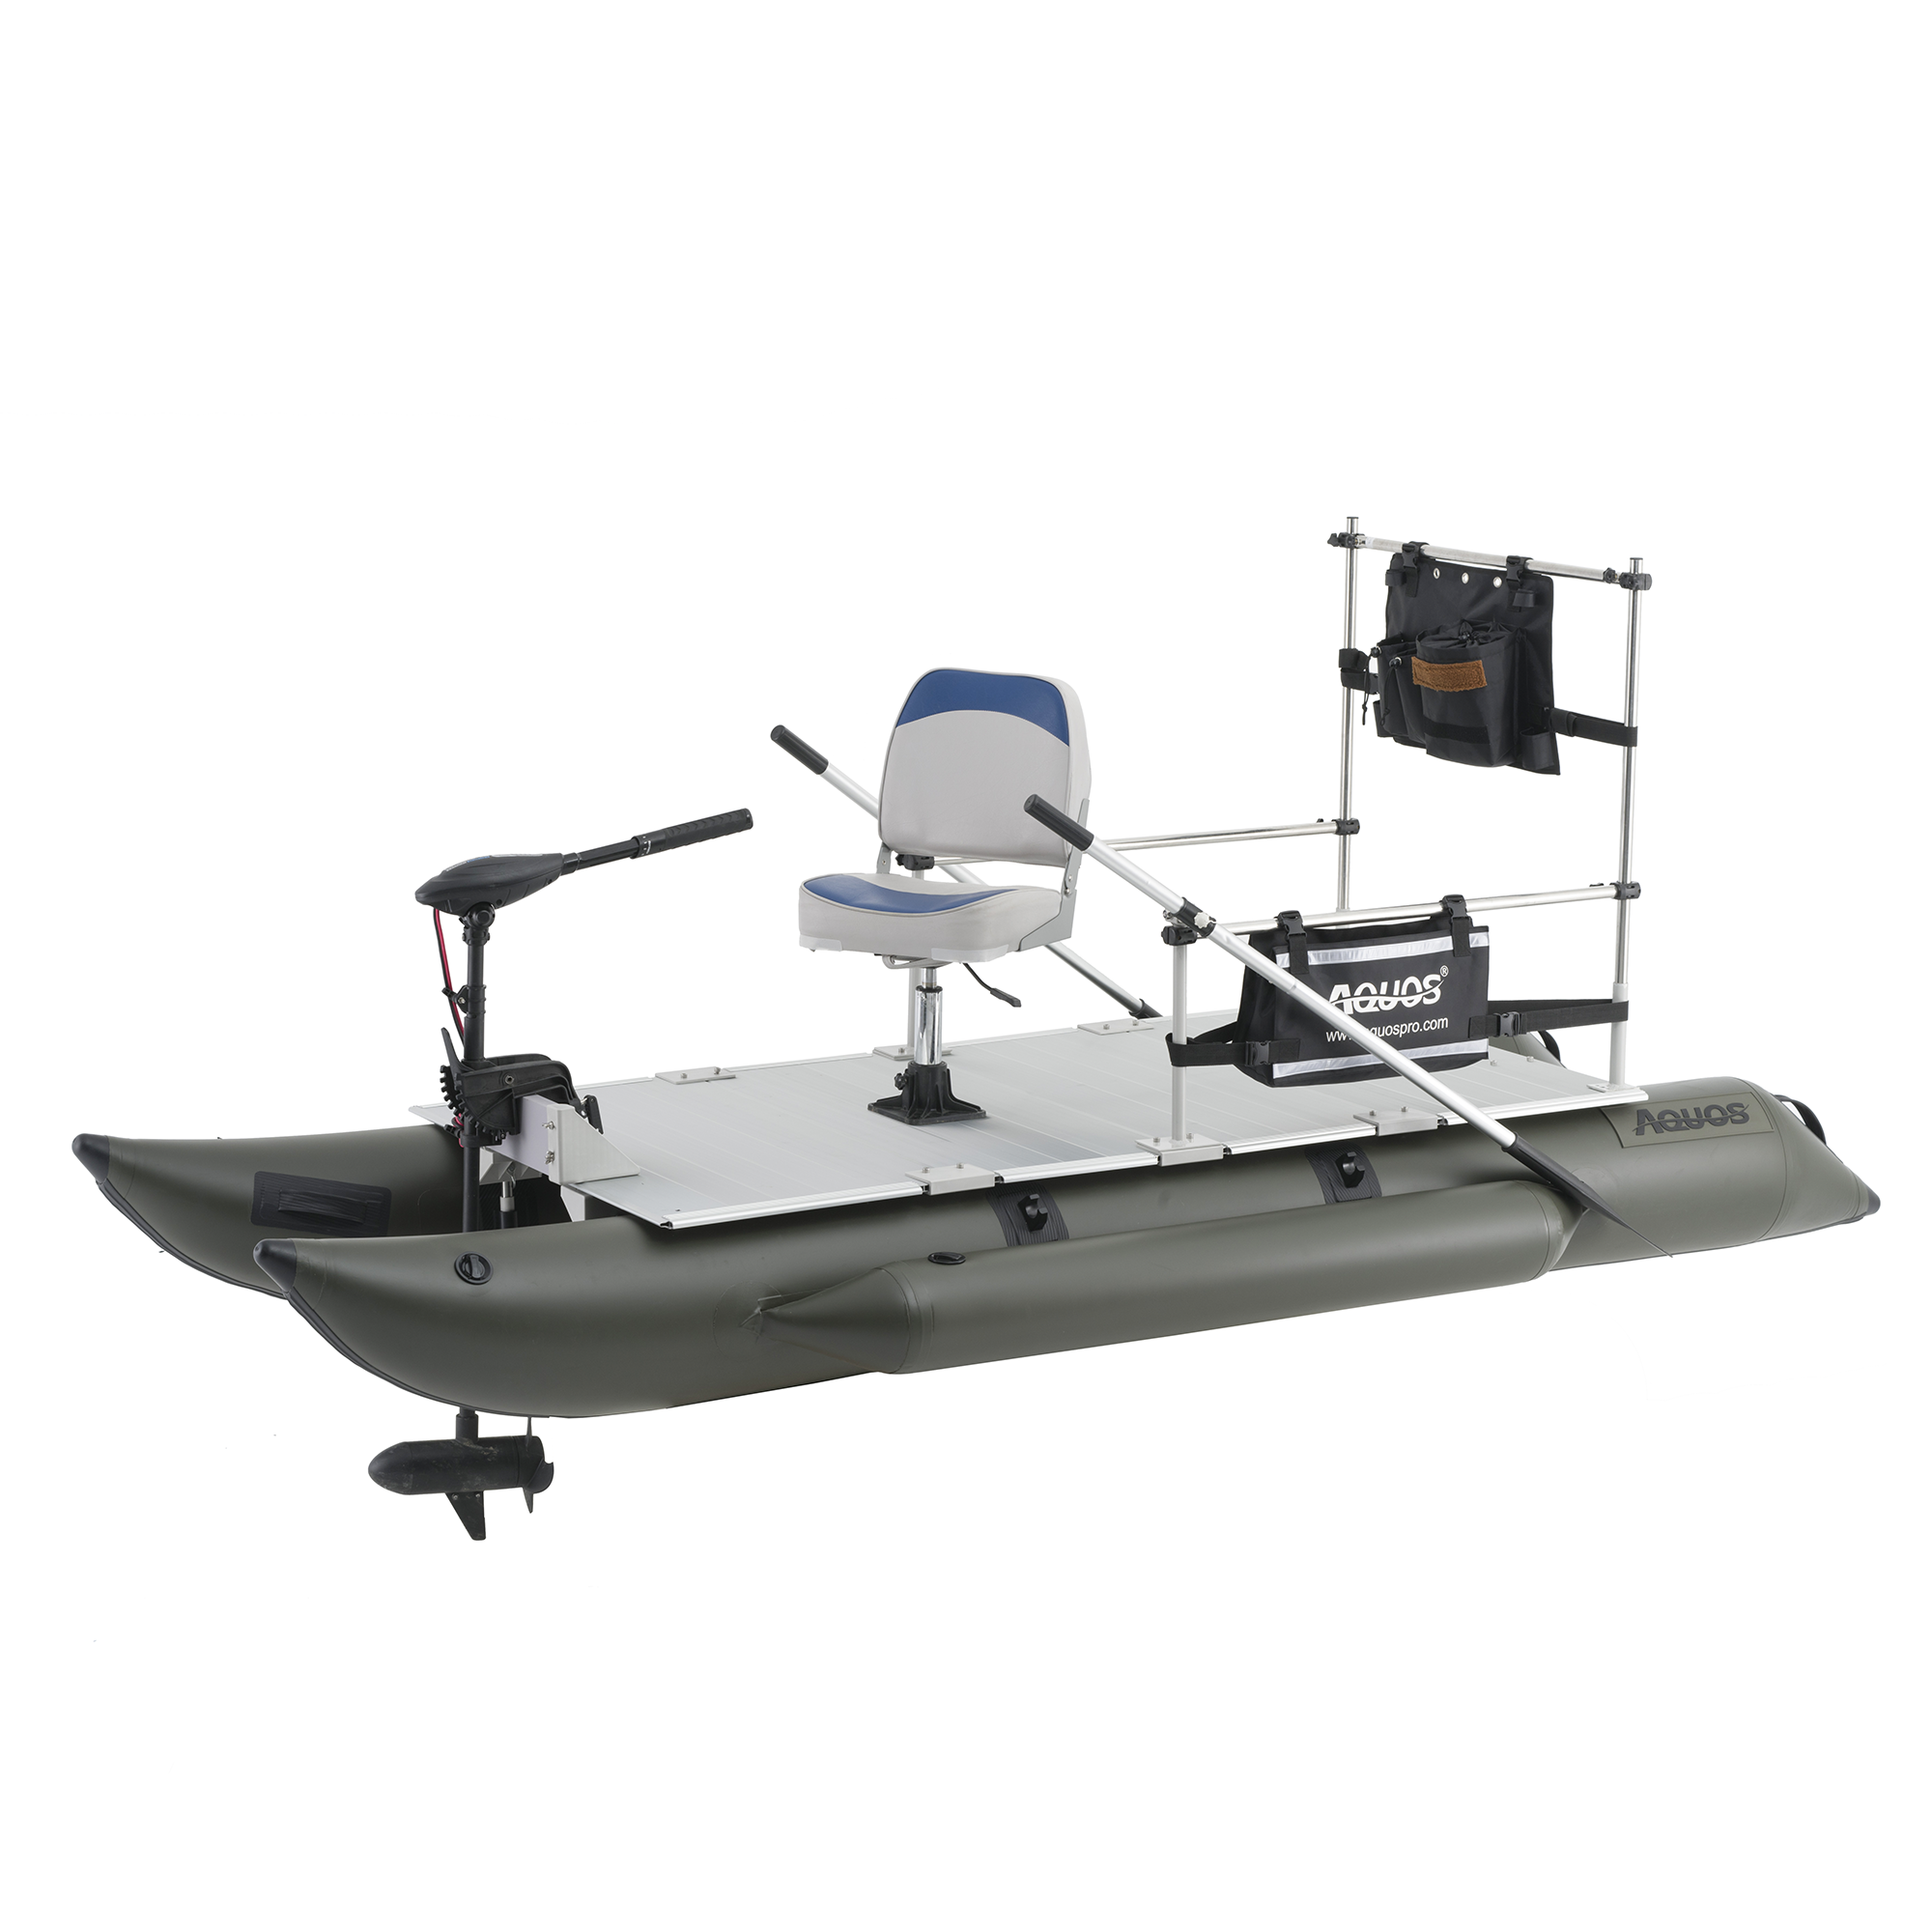 AQUOS New Heavy-Duty for Two Series 11.5 ft Inflatable Pontoon